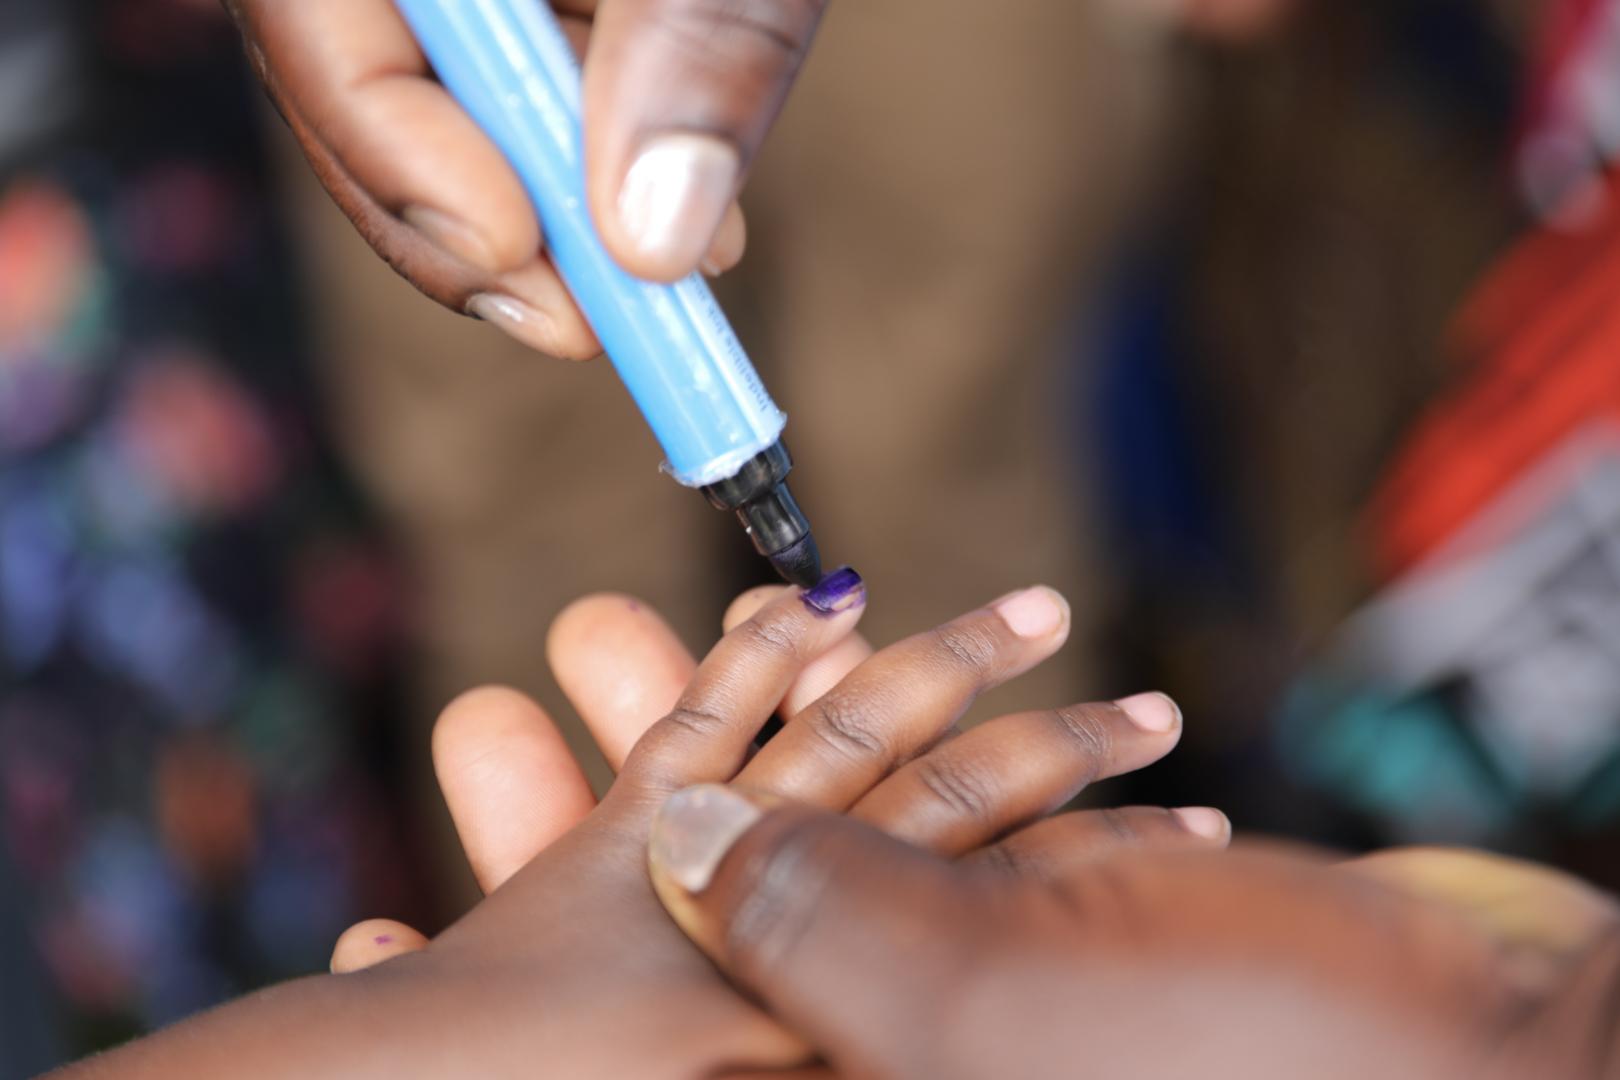 Approximately 16 000 vaccinators and community mobilizers were deployed in Mozambique's third round of the polio campaign. Their efforts to overcome vaccine hesitancy are essential to reaching high immunisation rates to eradicate polio.